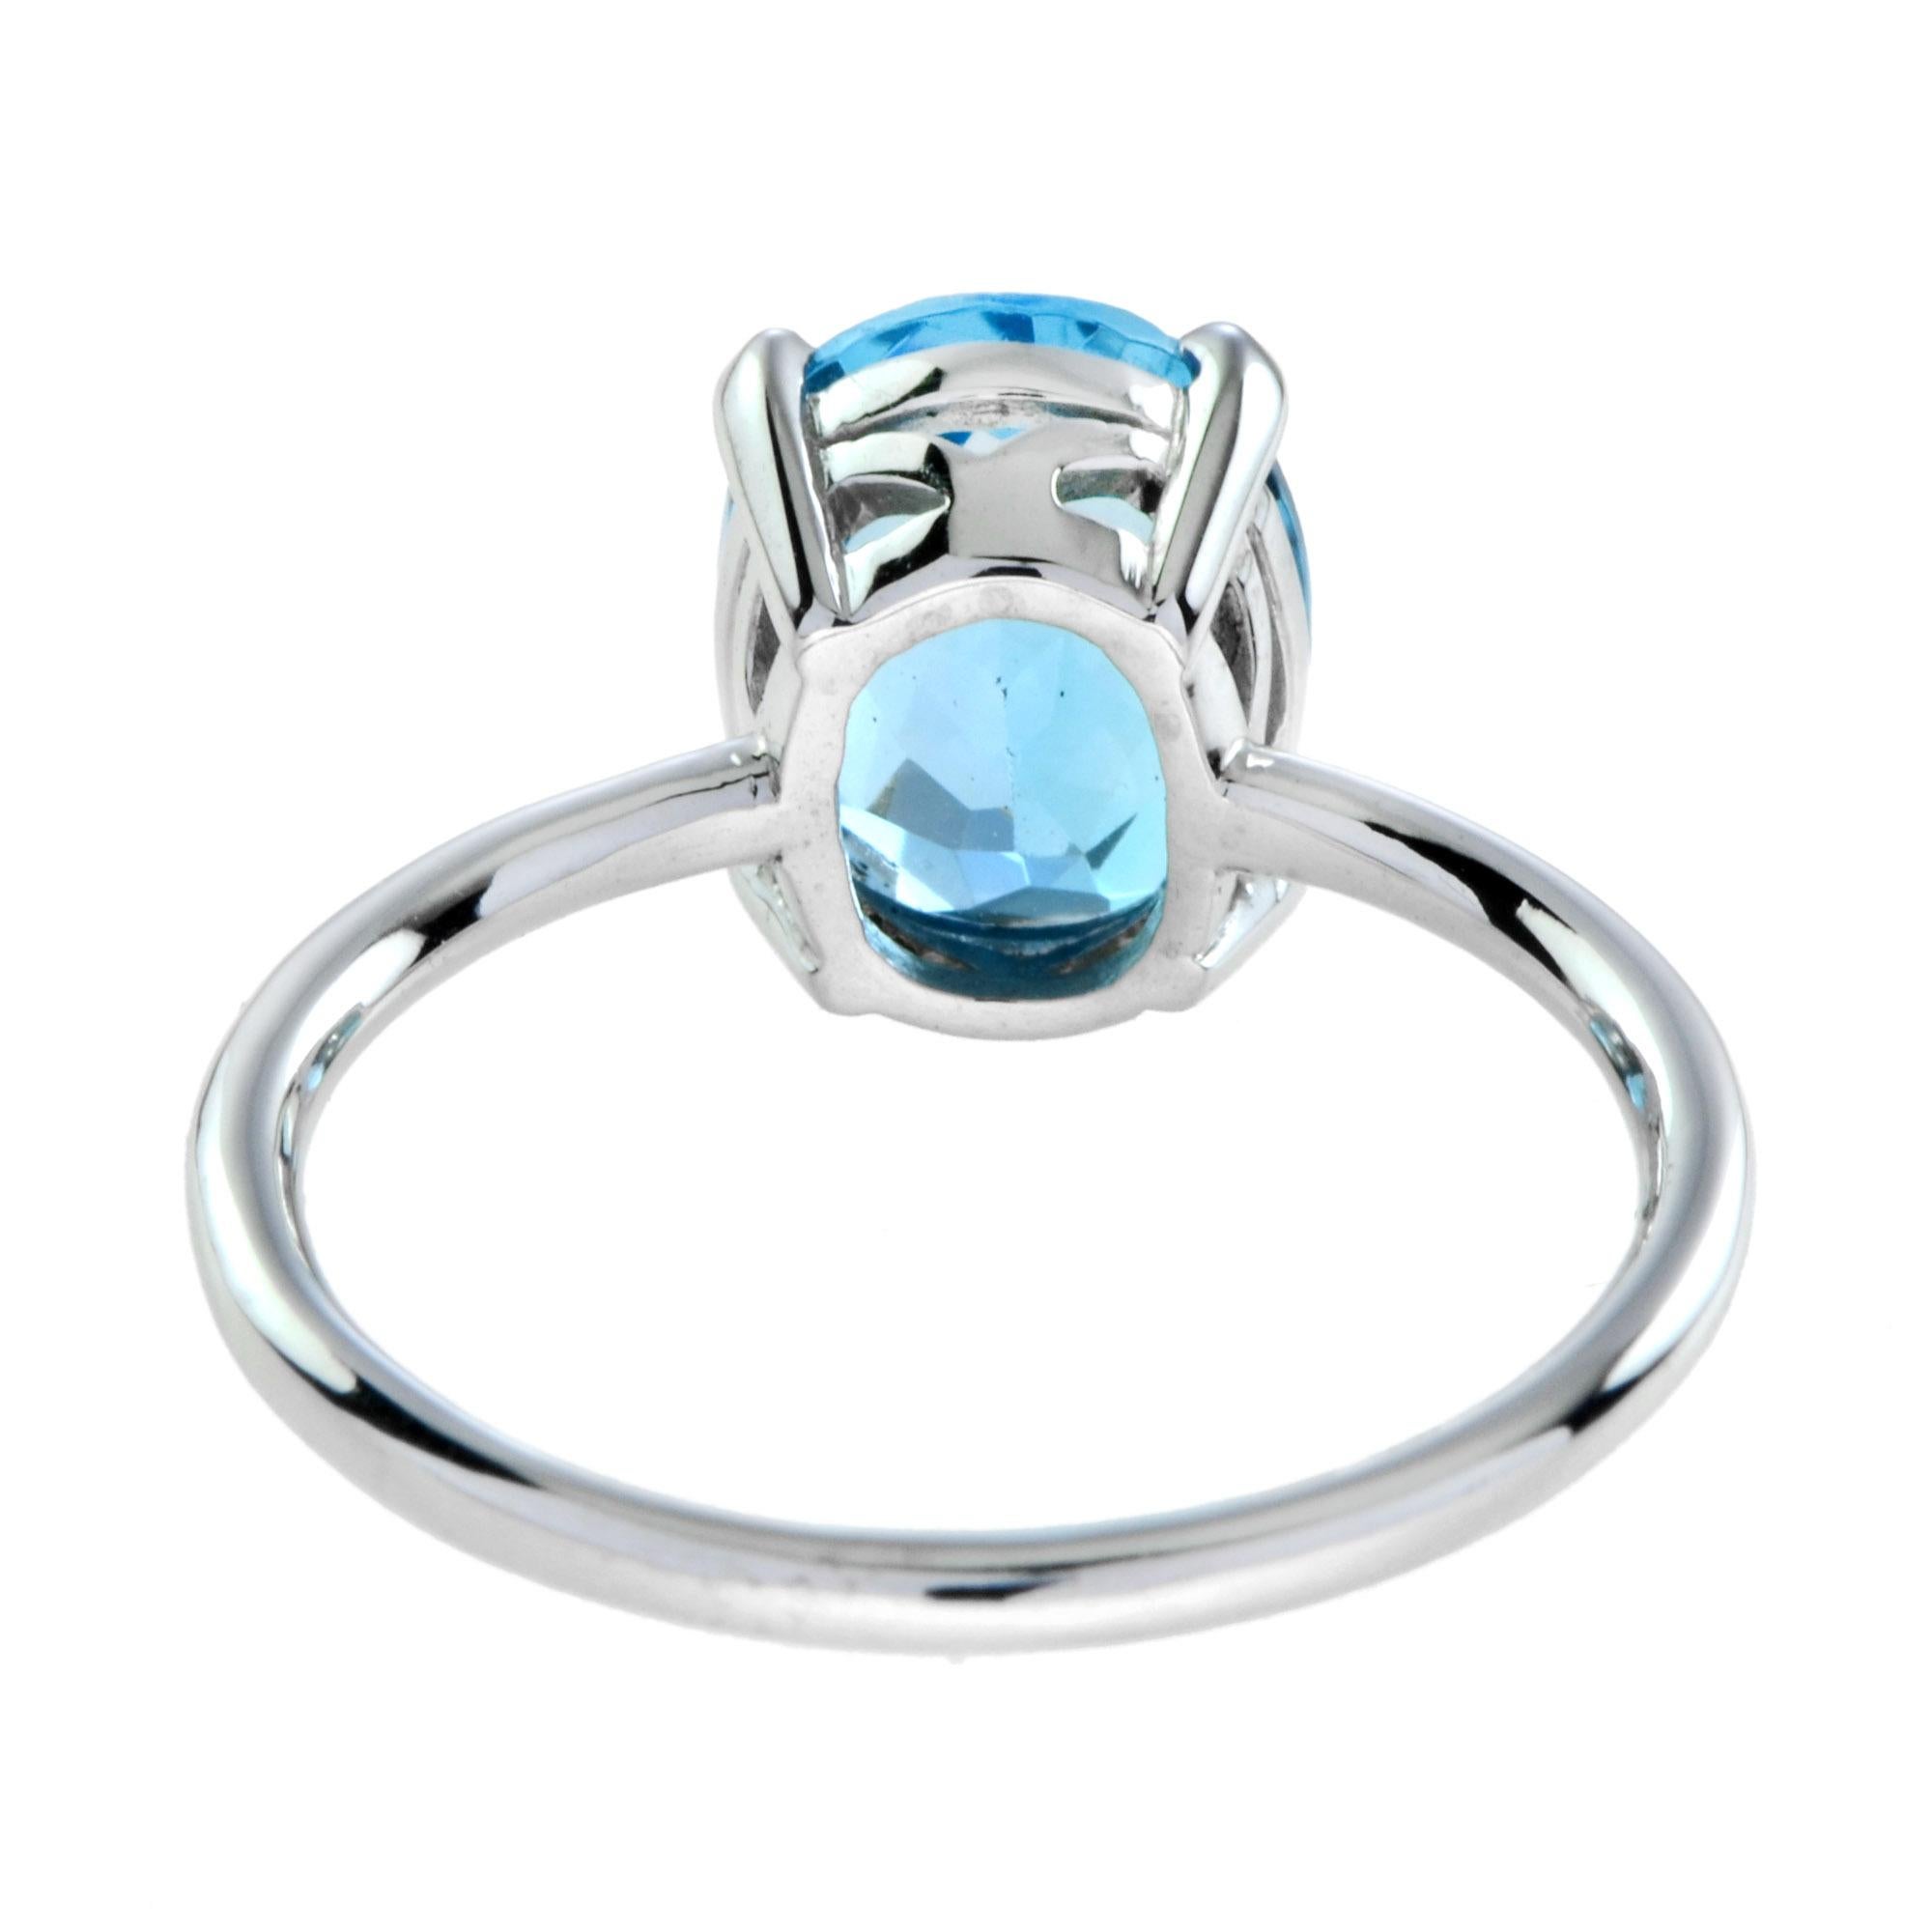 Oval Cut 3.50 ct. Oval Swiss Blue Topaz Solitaire Engagement Ring in 9K White Gold For Sale